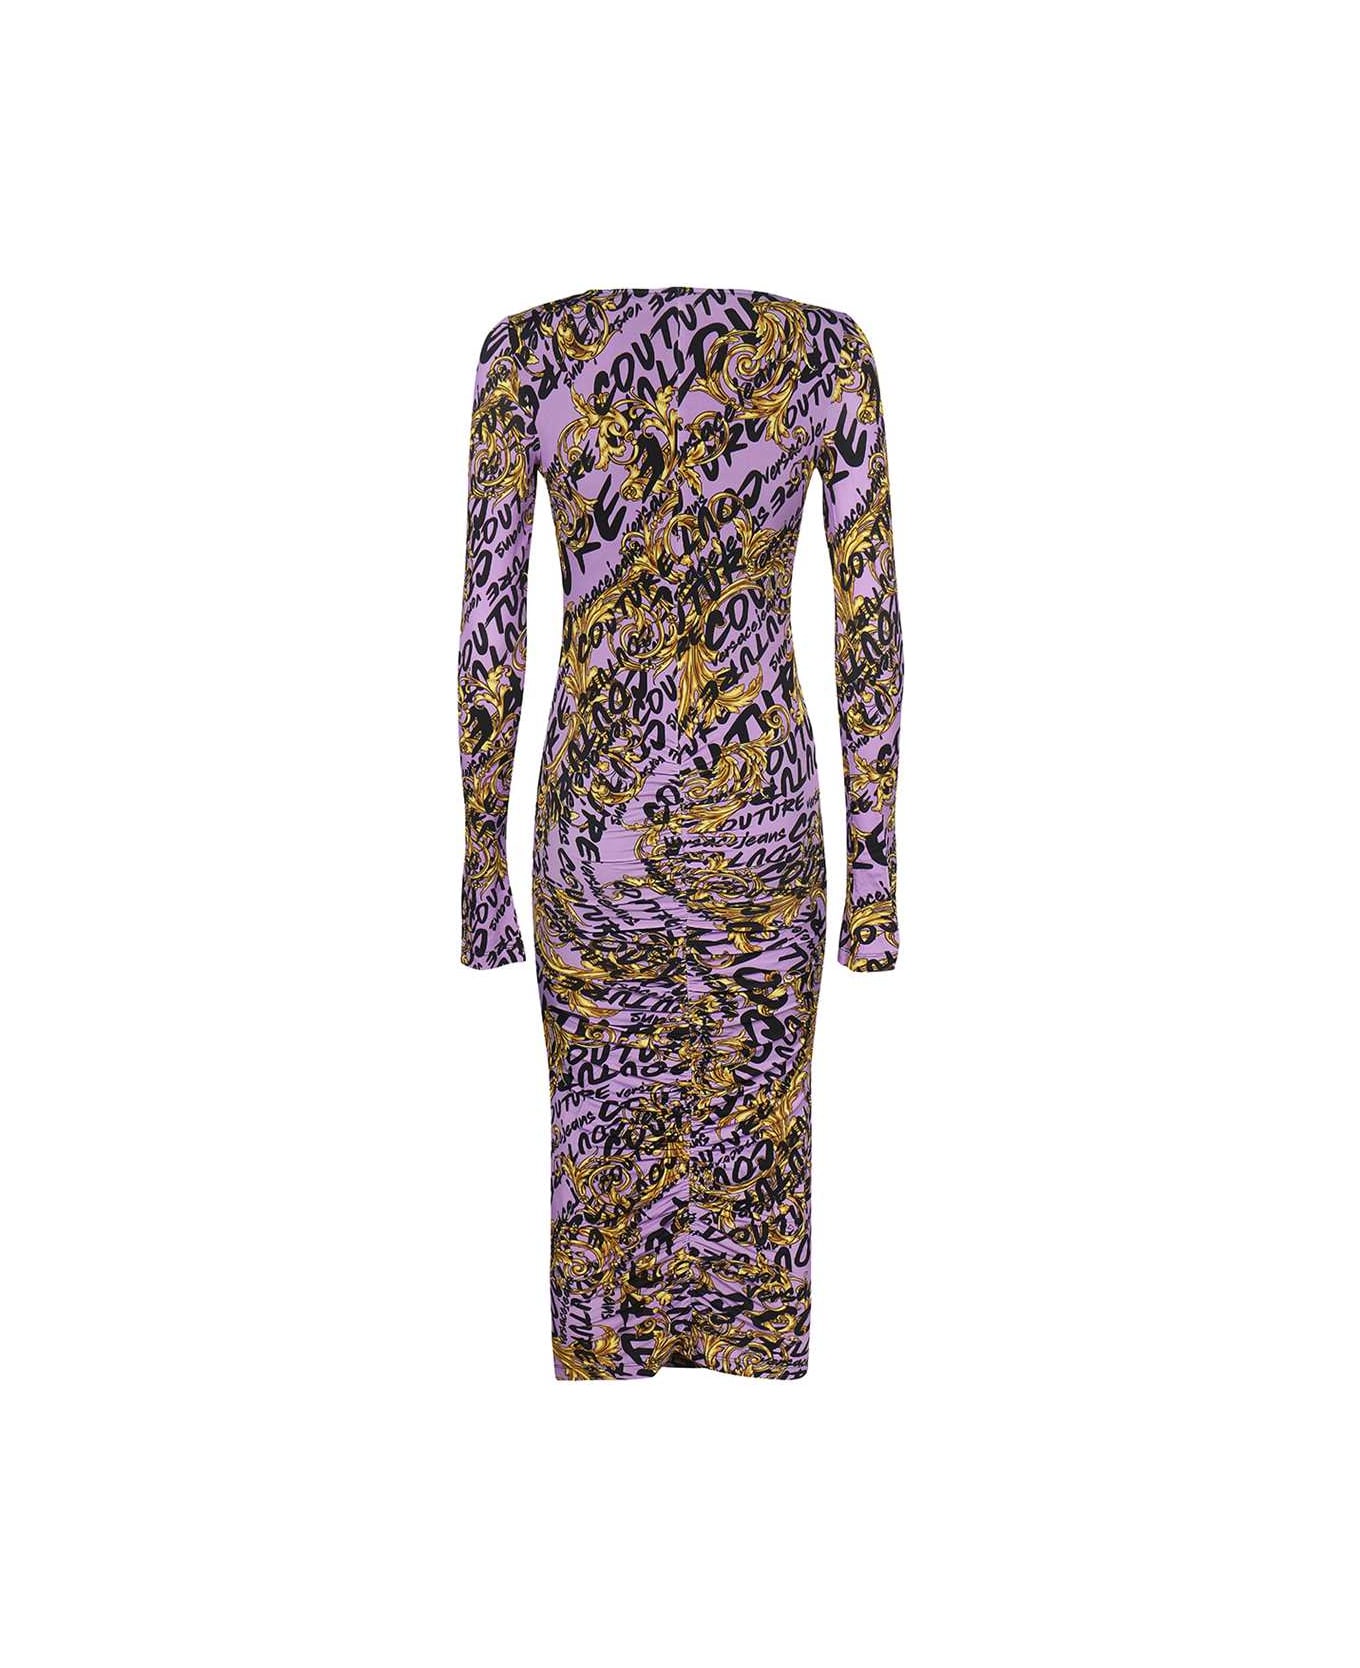 Versace Jeans Couture Printed Dress - Gold